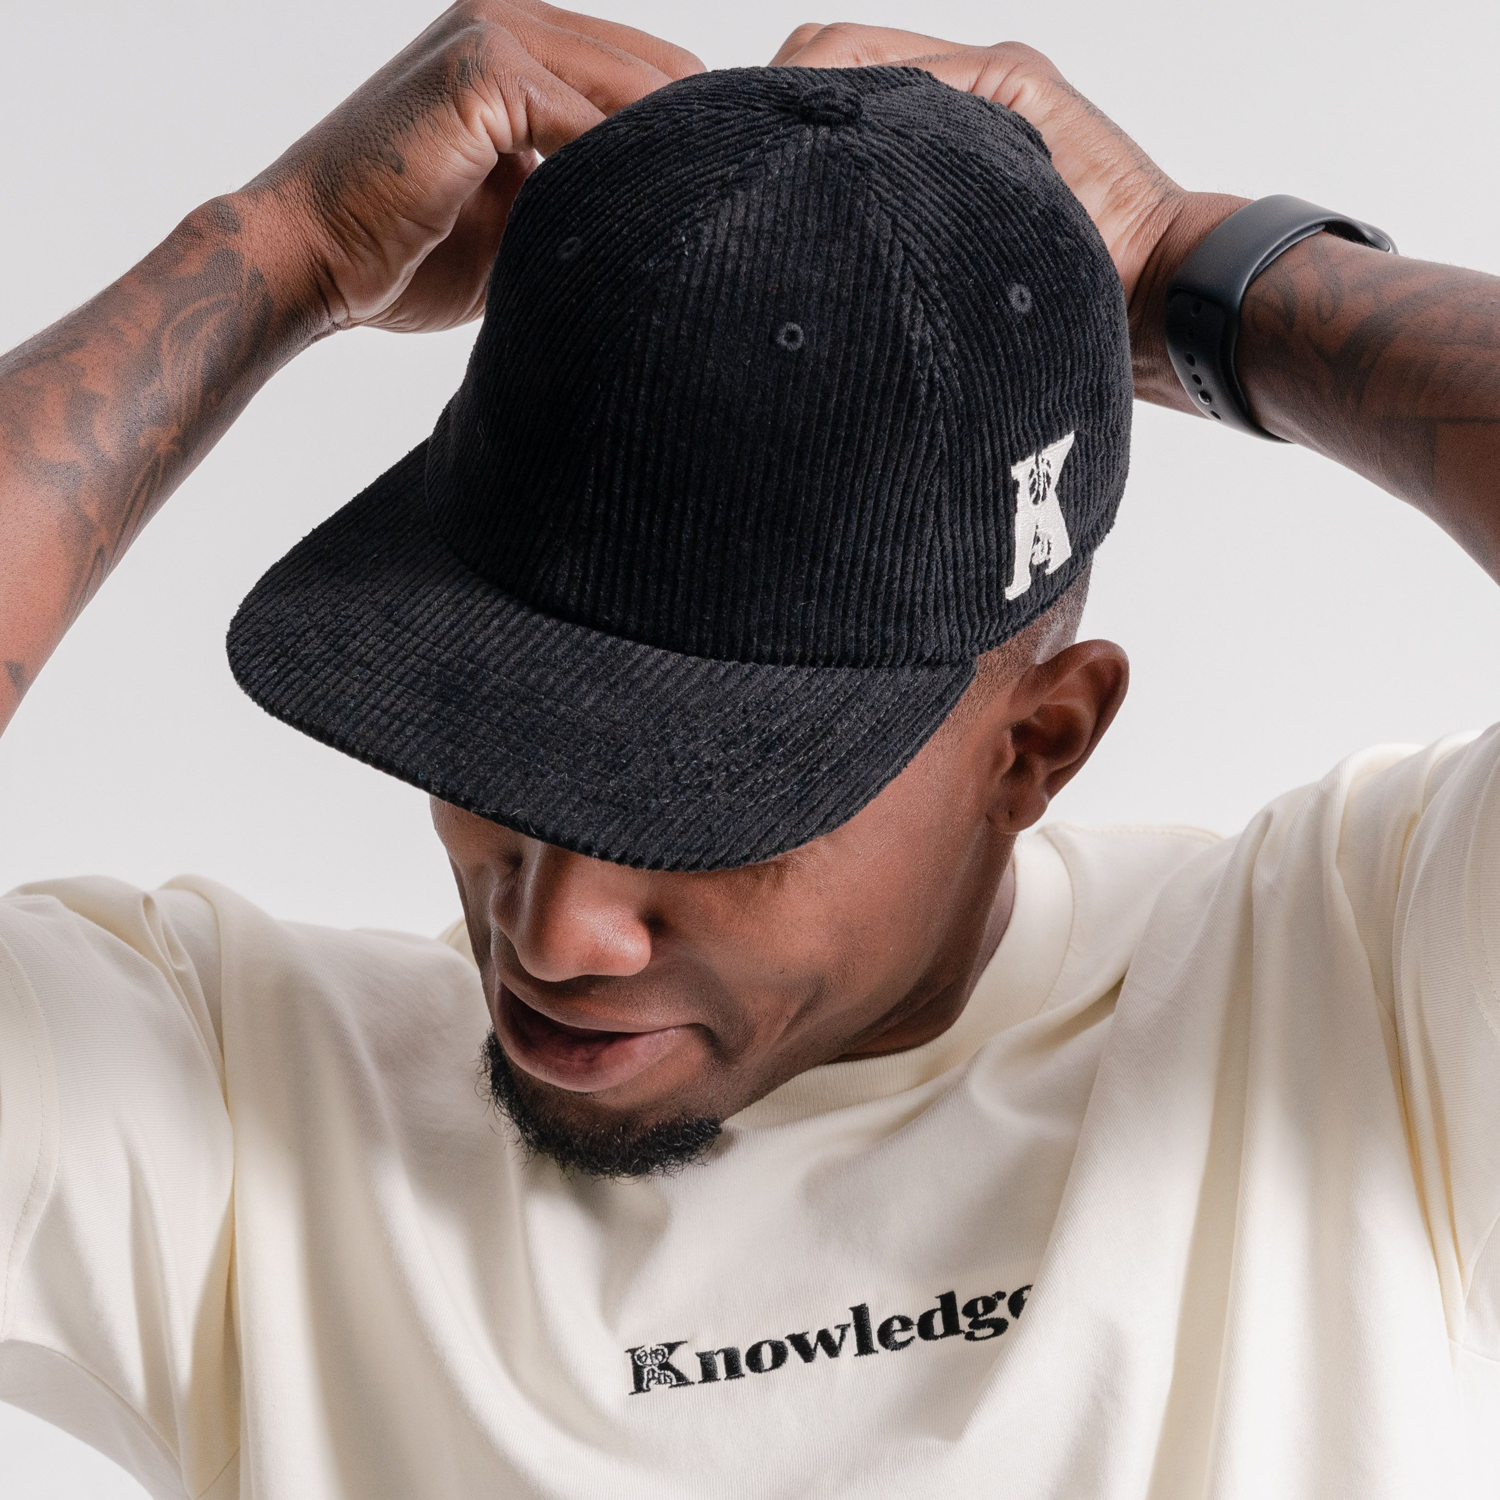 Knowledge tee -Butter